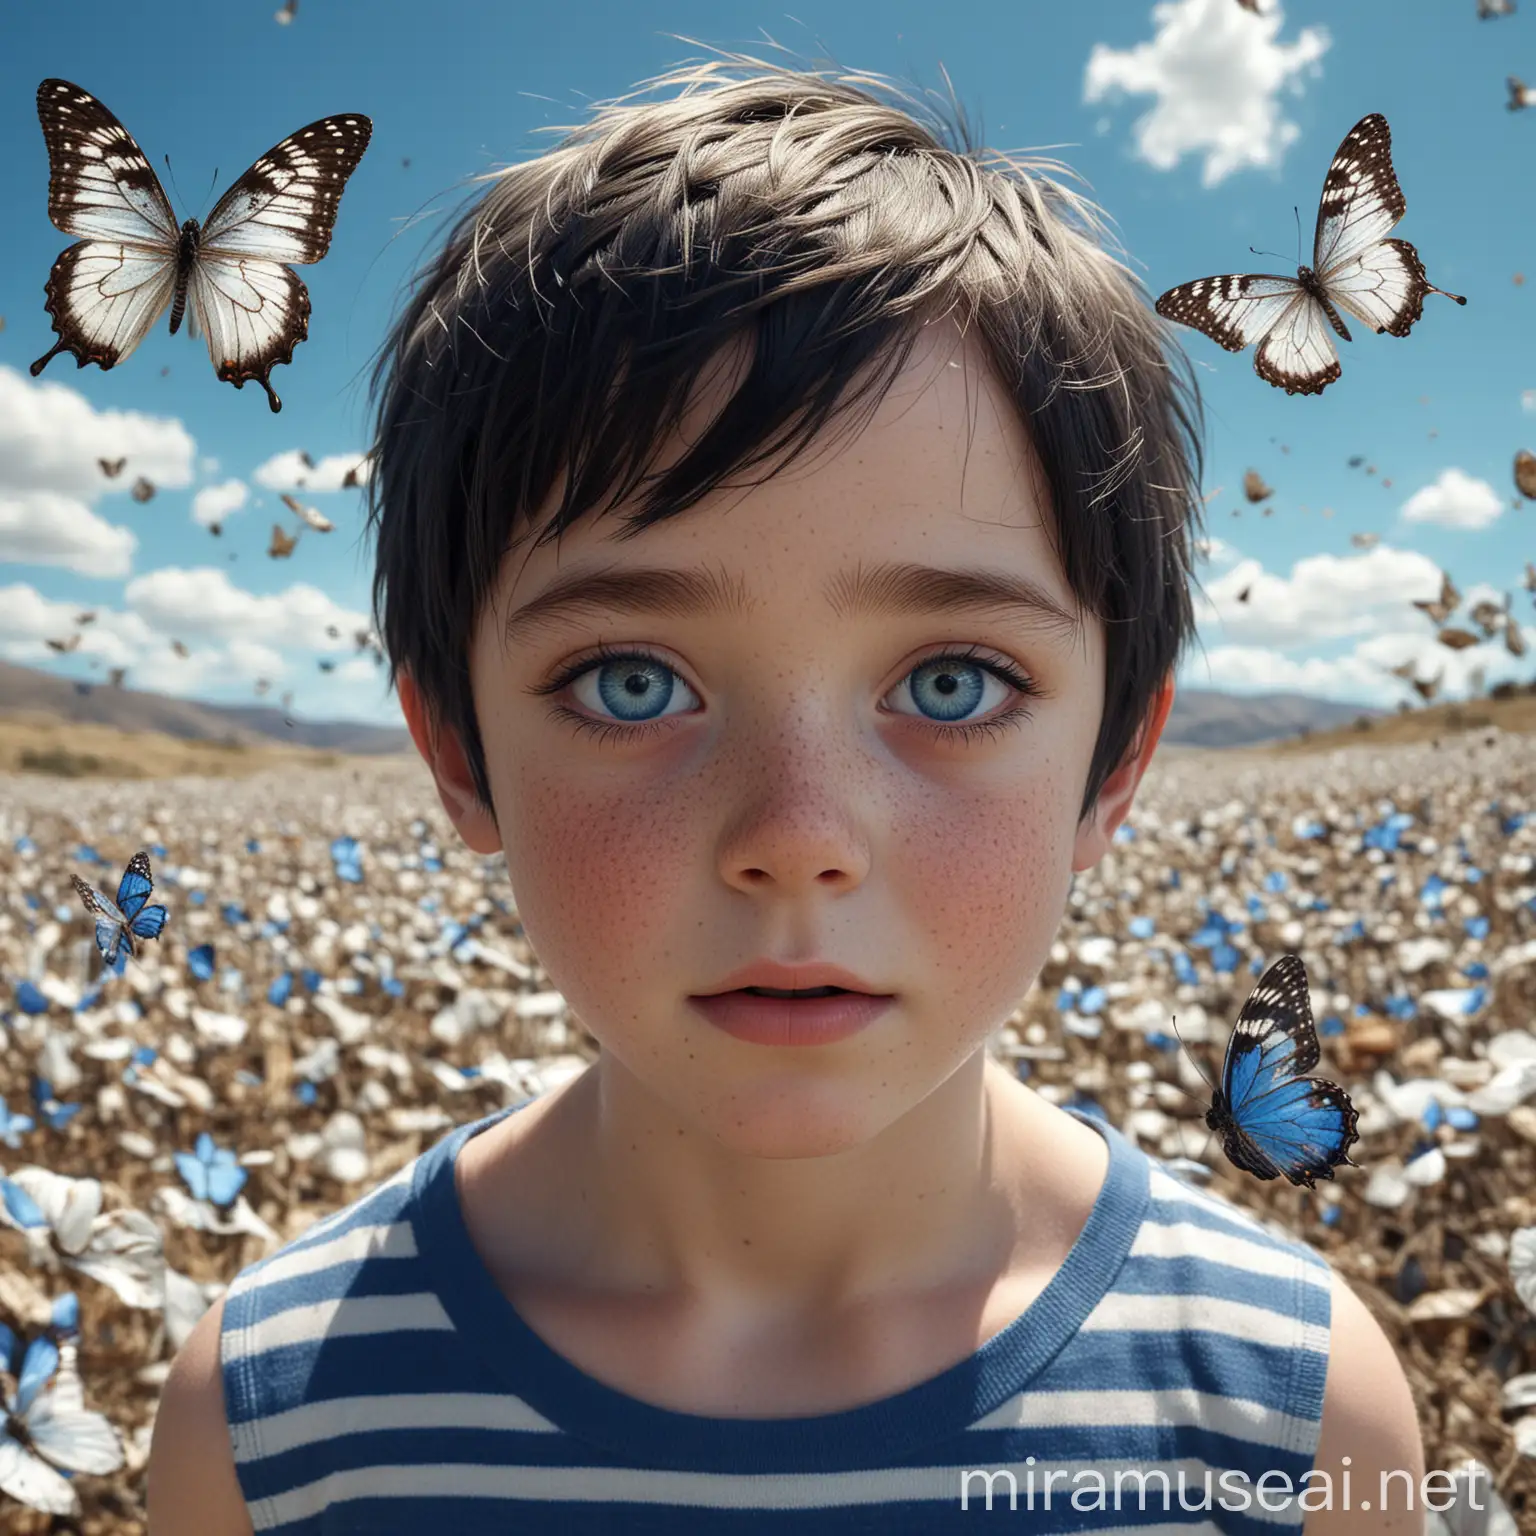 pale child, with freckles, blue eyes, short black hair, short shorts, blue and white striped shirt, above his right eye a butterfly. In the background a plain landscape, blue sky, a thousand shells flying. 3d effect textured background